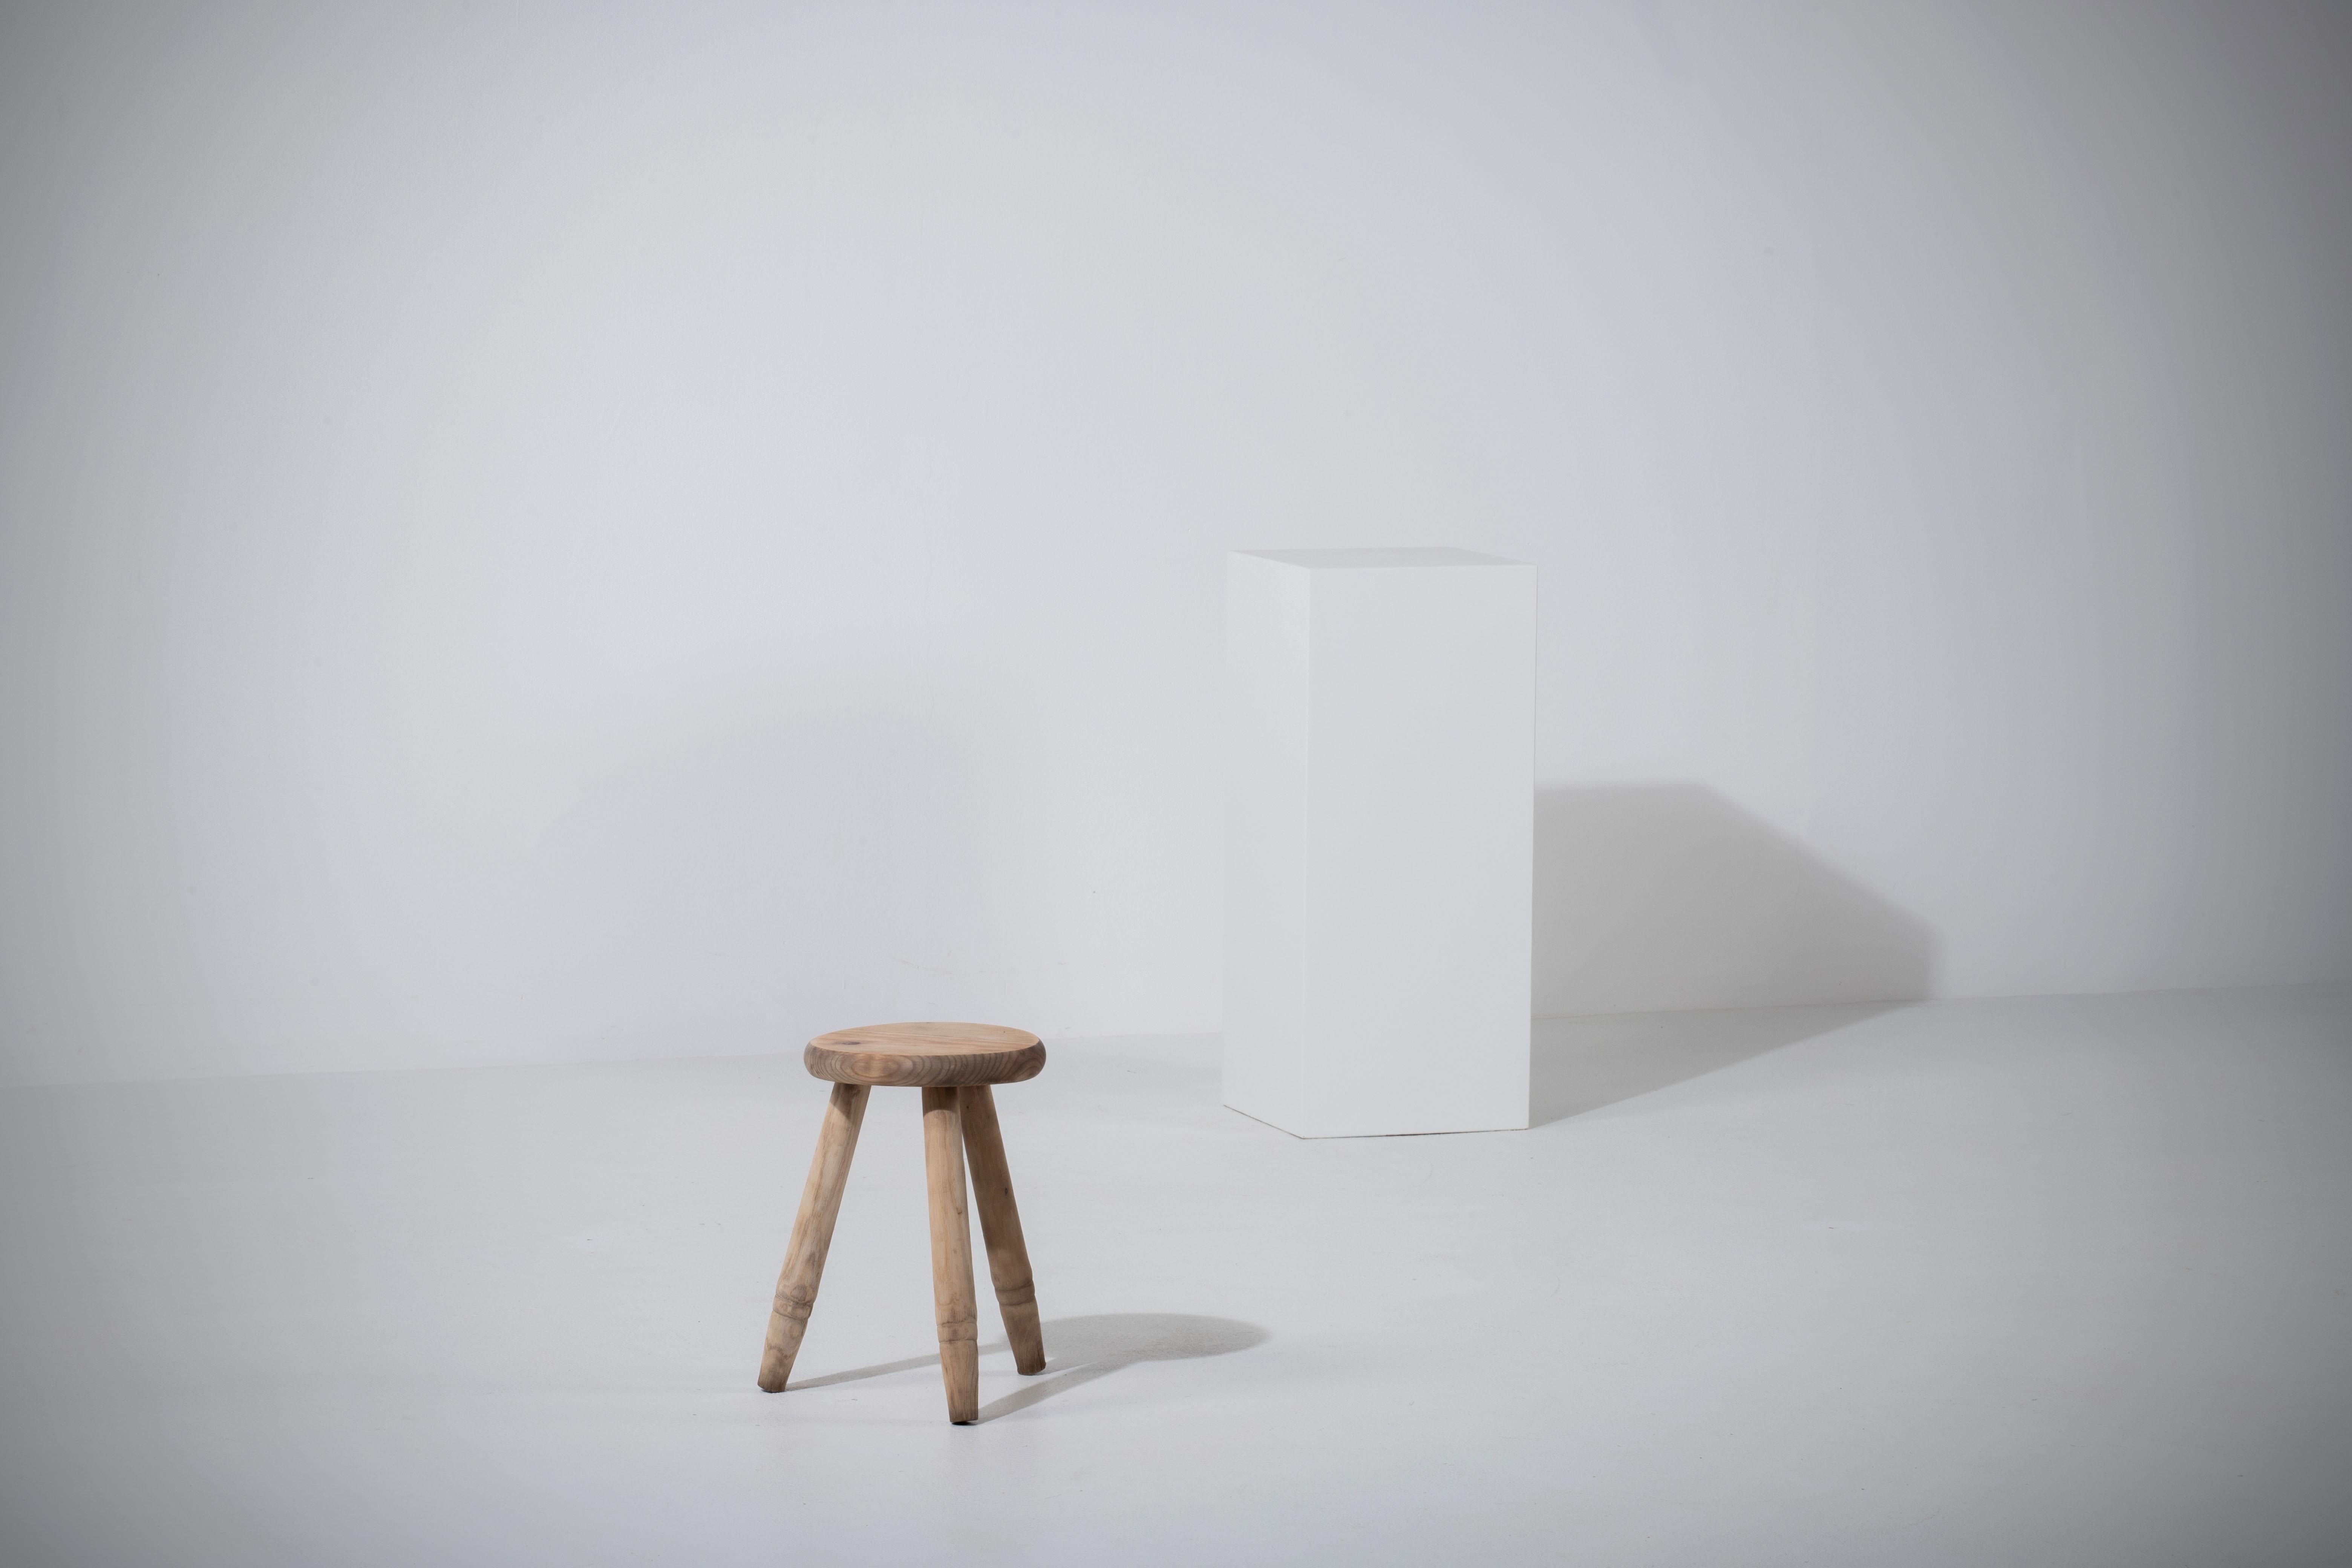 Introducing a fantastic mid-century wooden stool, crafted in France during the 1960s. This piece is constructed without the use of hardware, boasting an elegant round seat and gracefully tapered legs, all made from rich pine wood.

The design is a